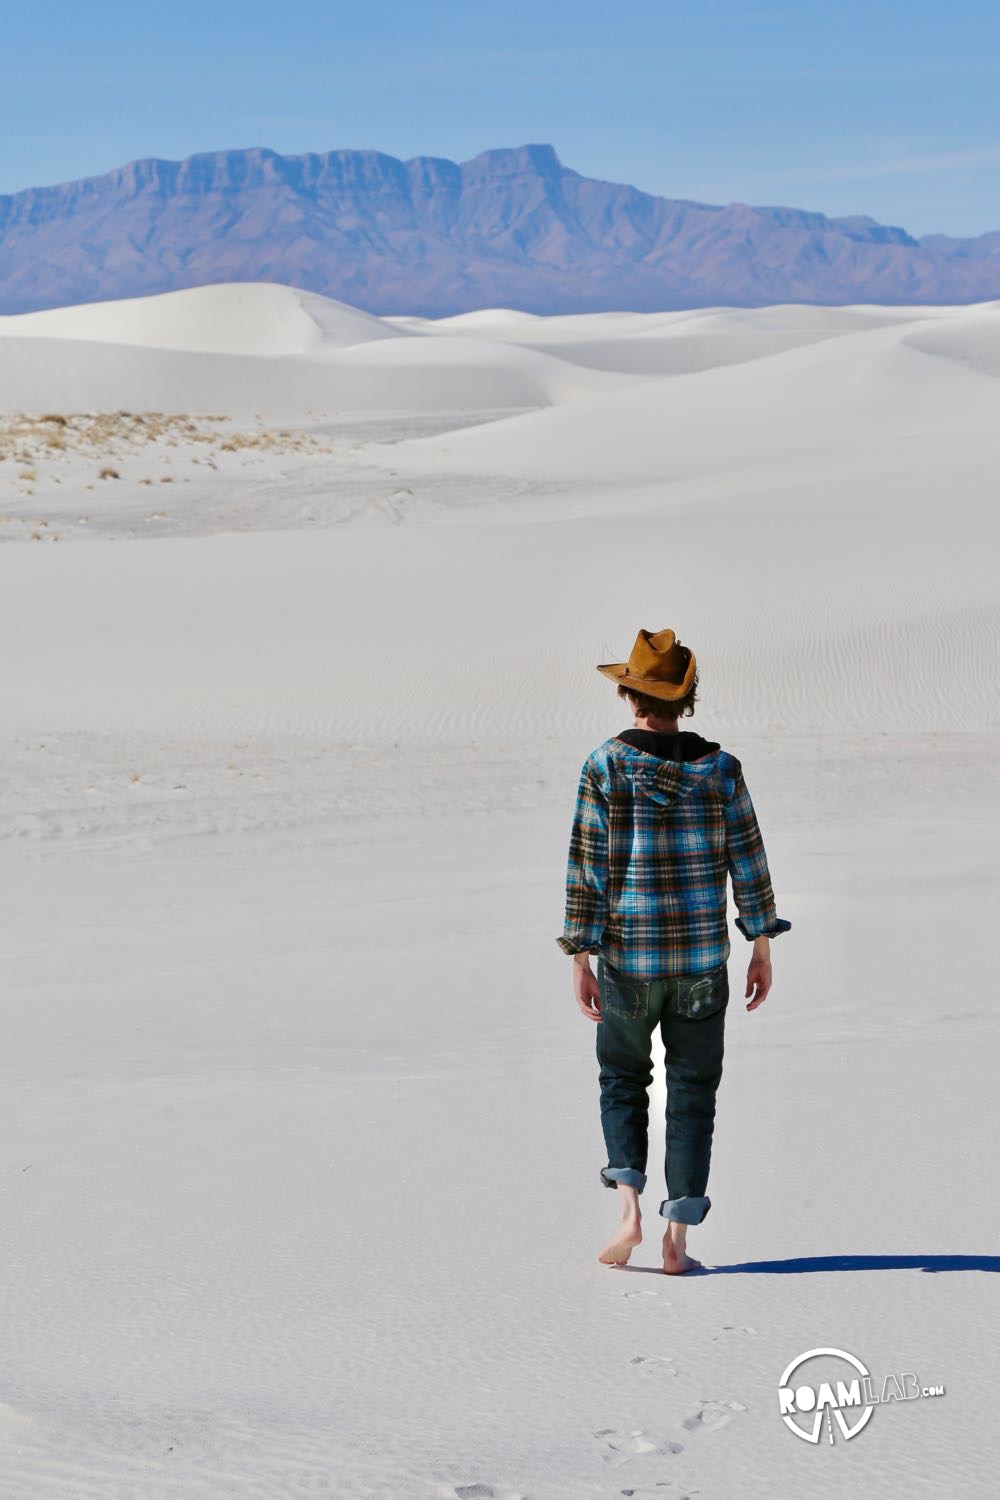 Hiking the dunes of White Sands National Monument